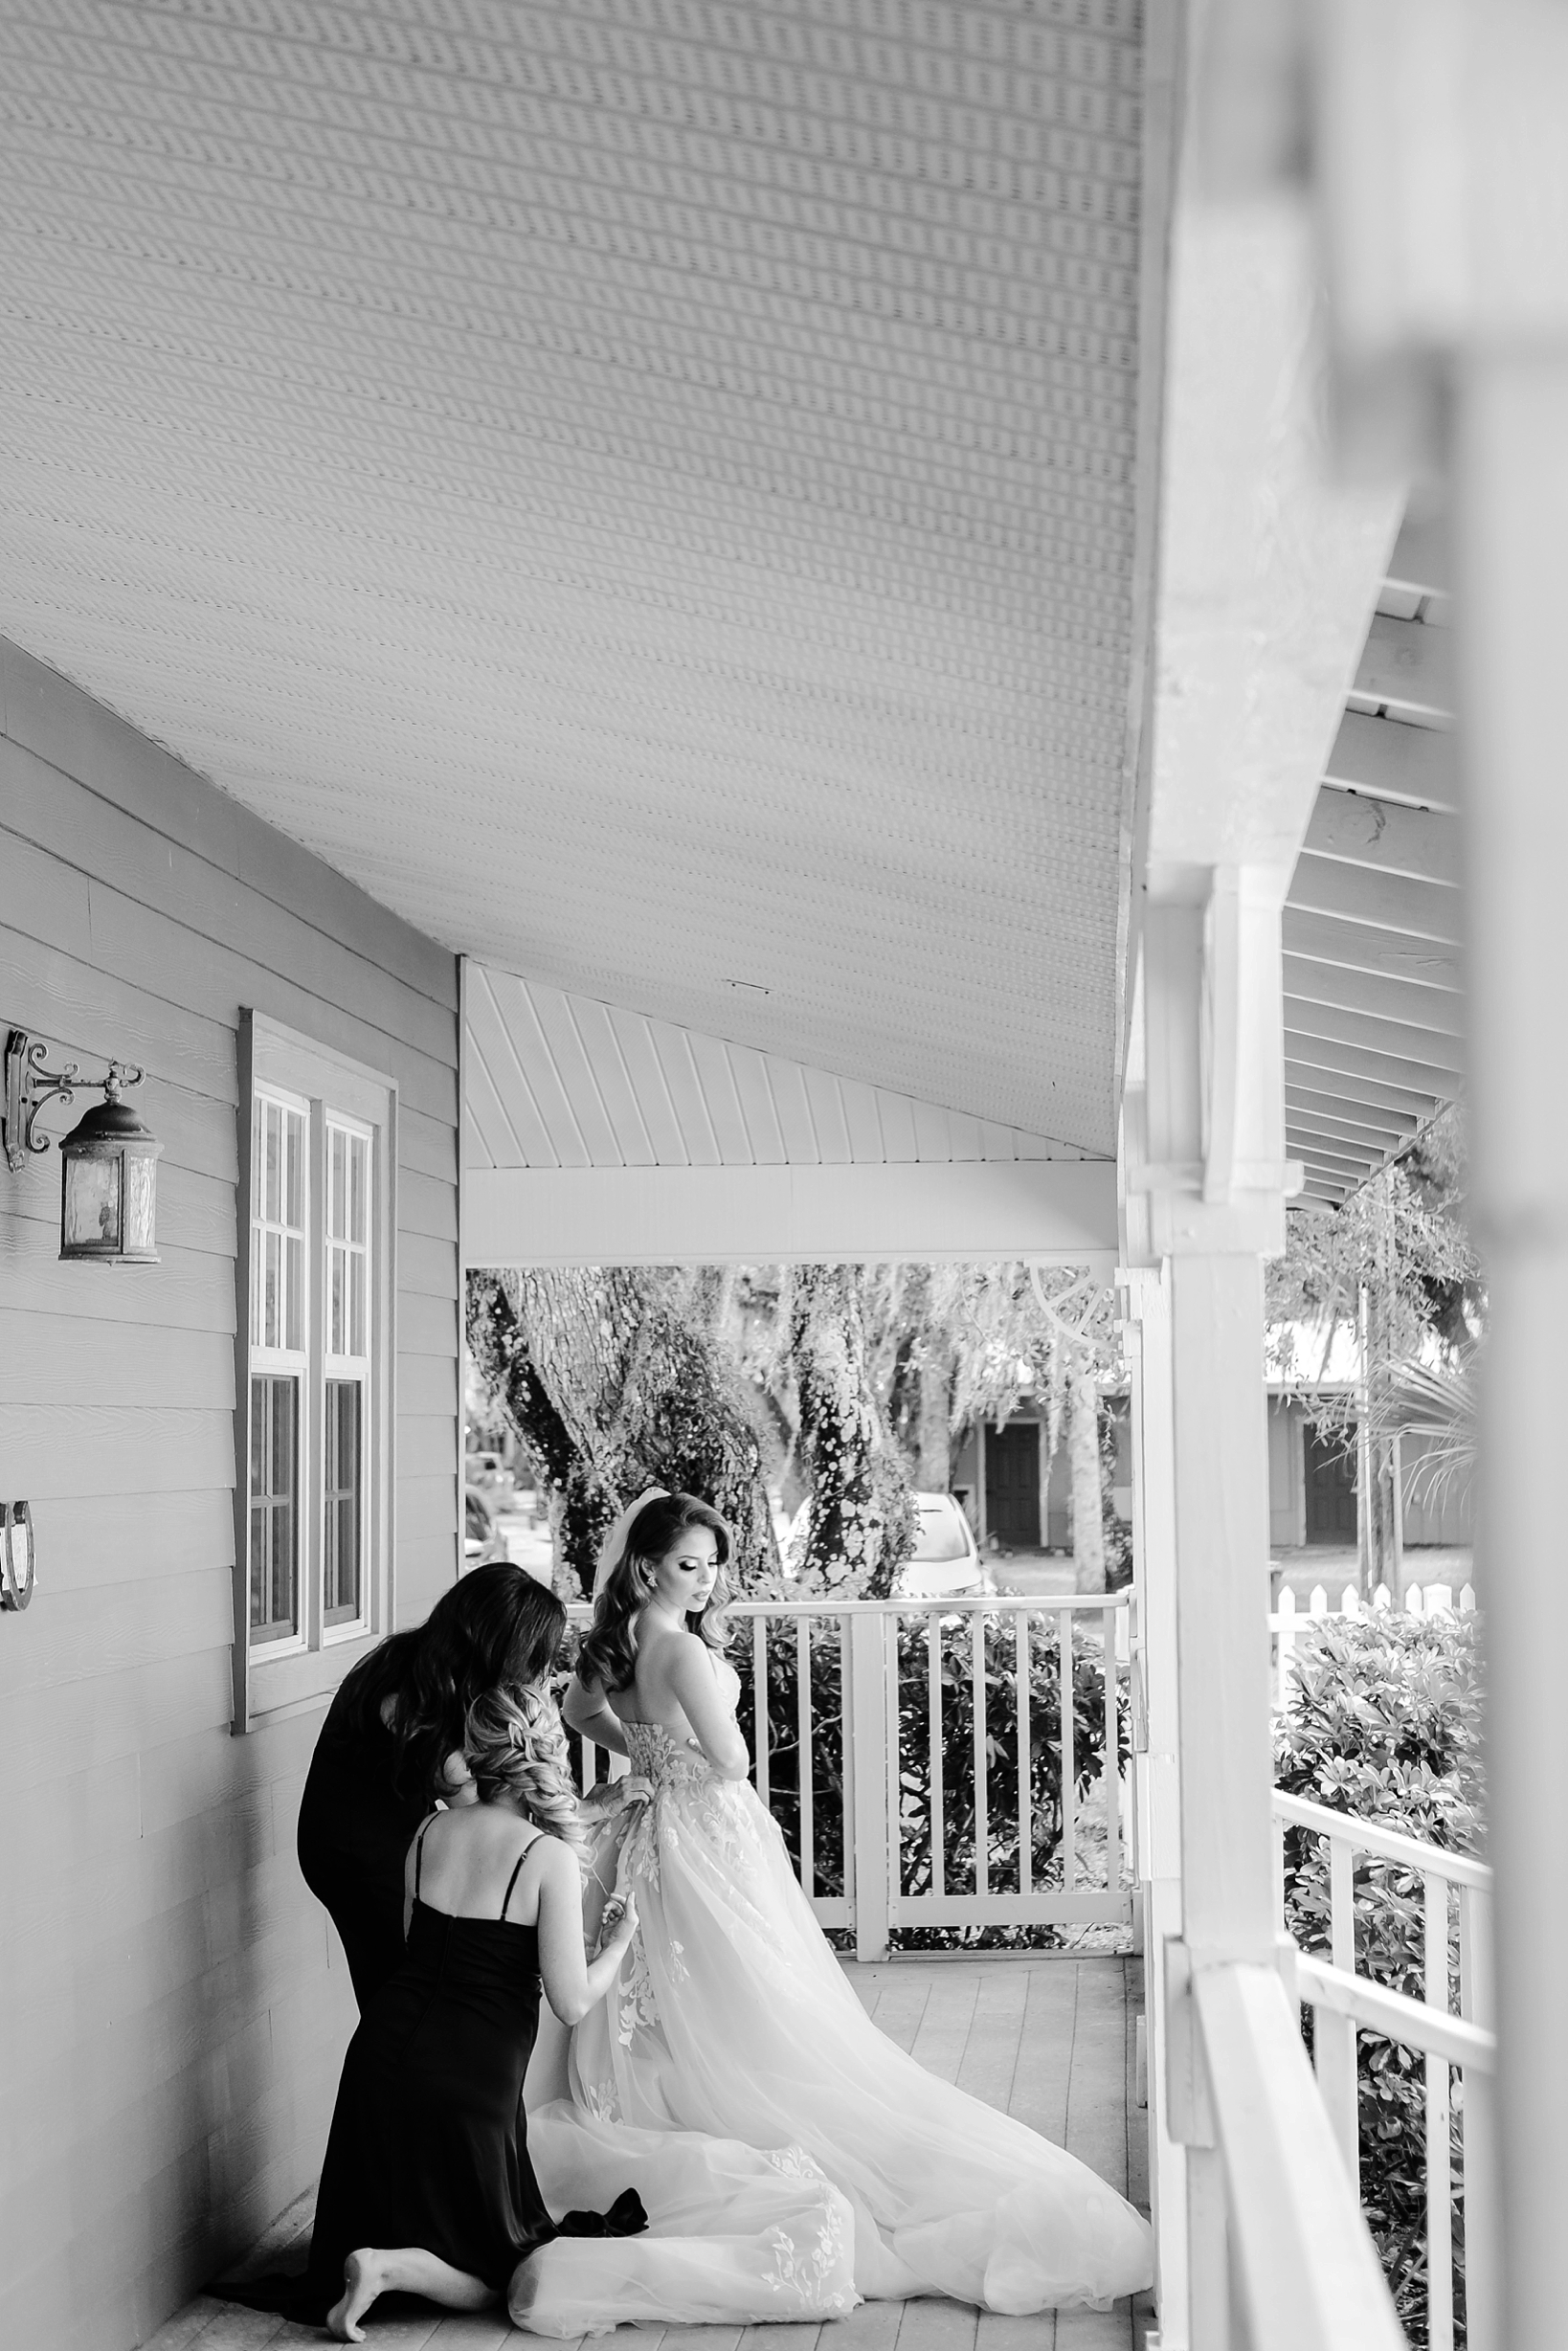 Bride photographed in black and white getting helped into her wedding dress